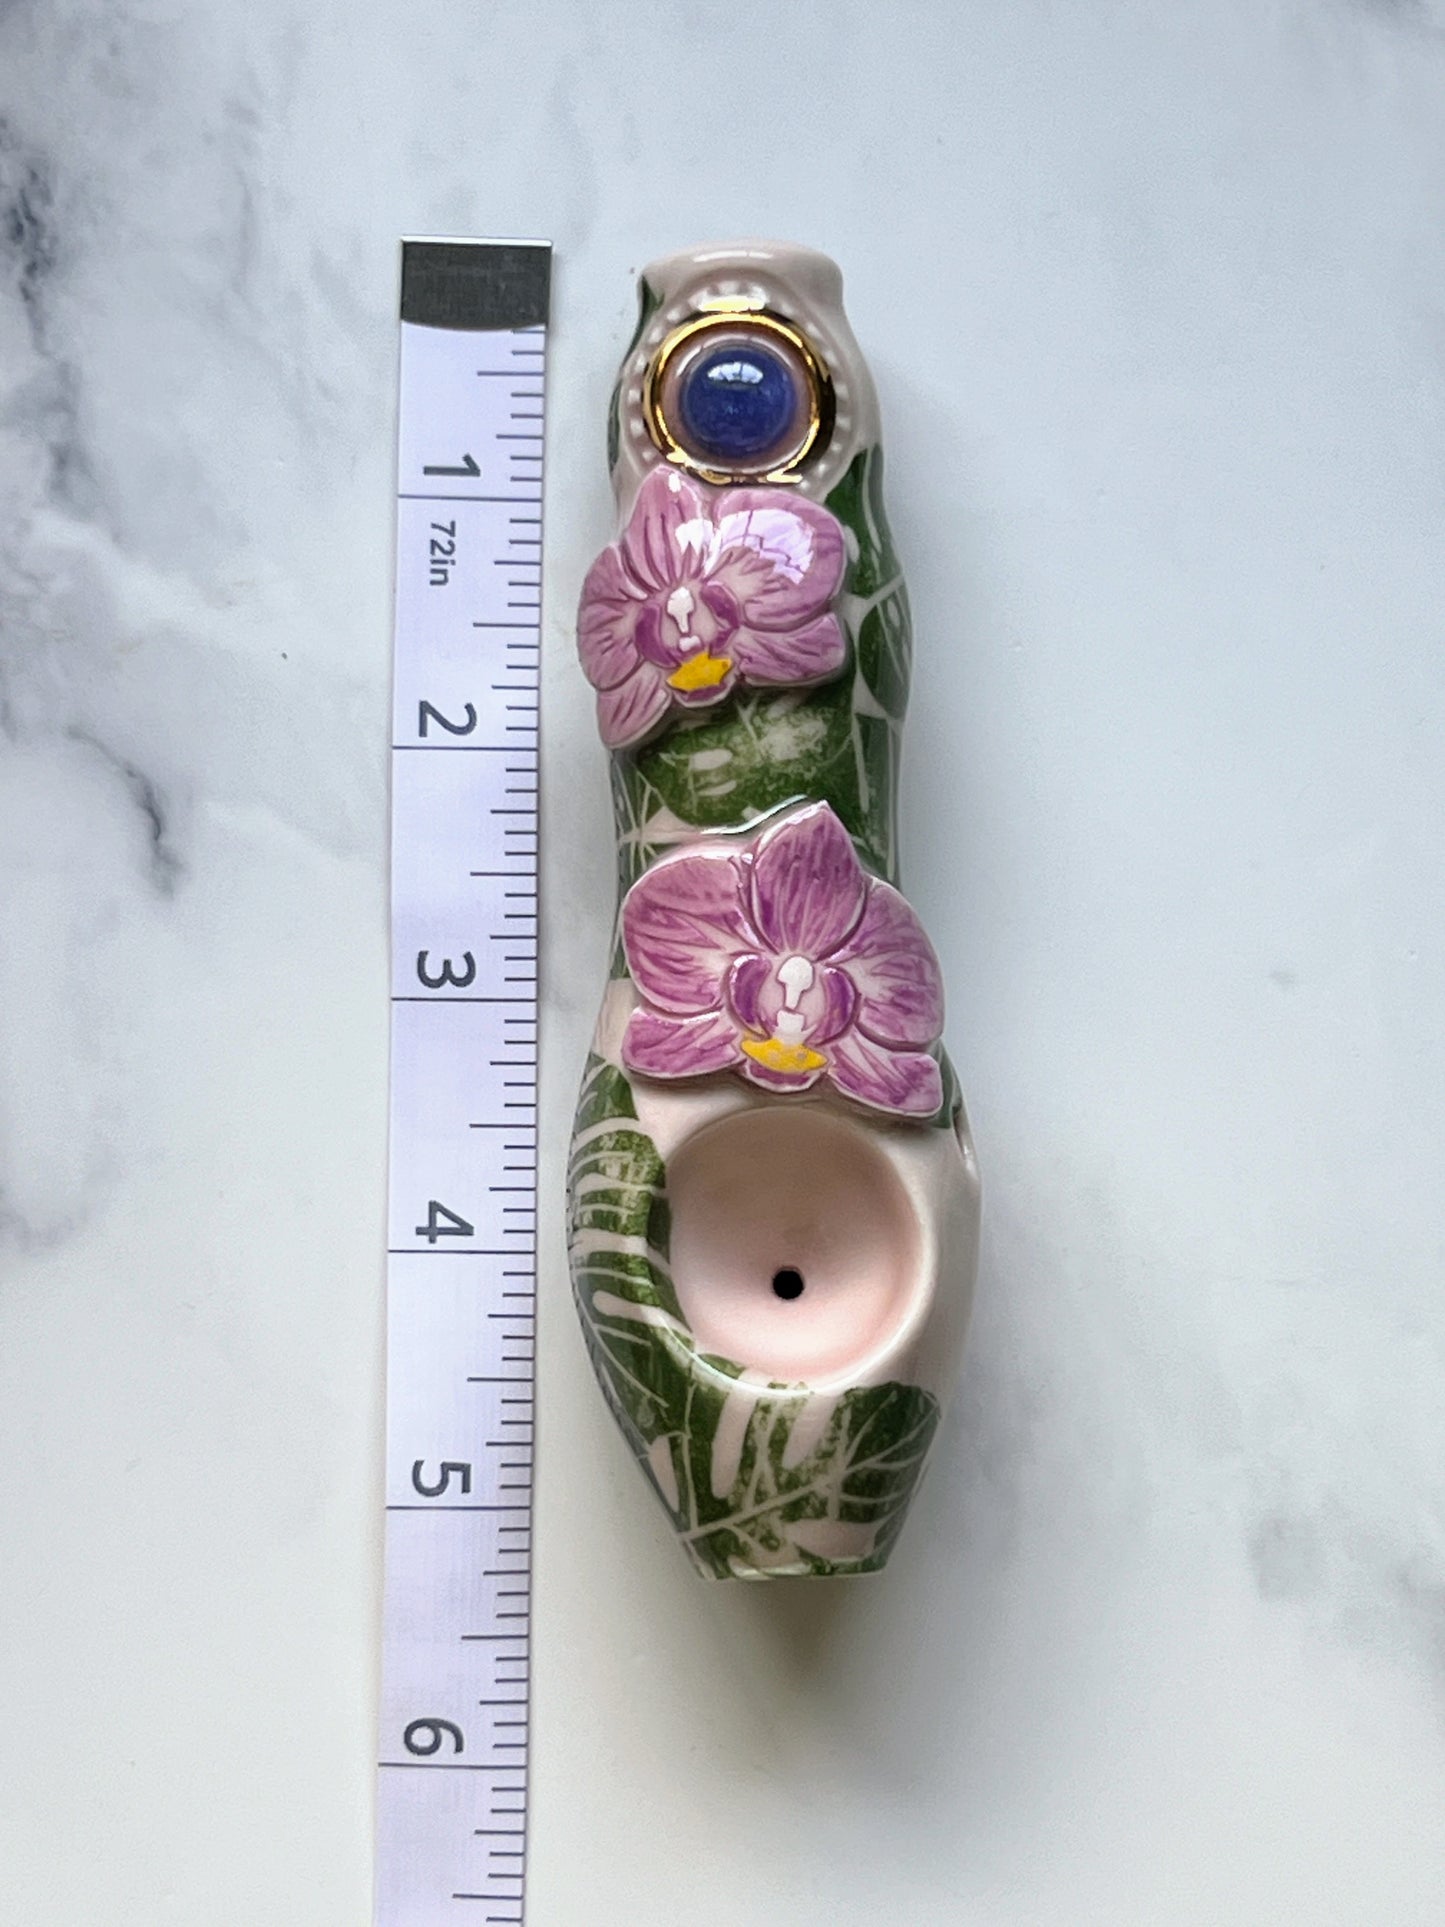 Kyanite Crystal Pipe Orchid and Monstera Leaf Ceramic Porcelain Smoking Pipe